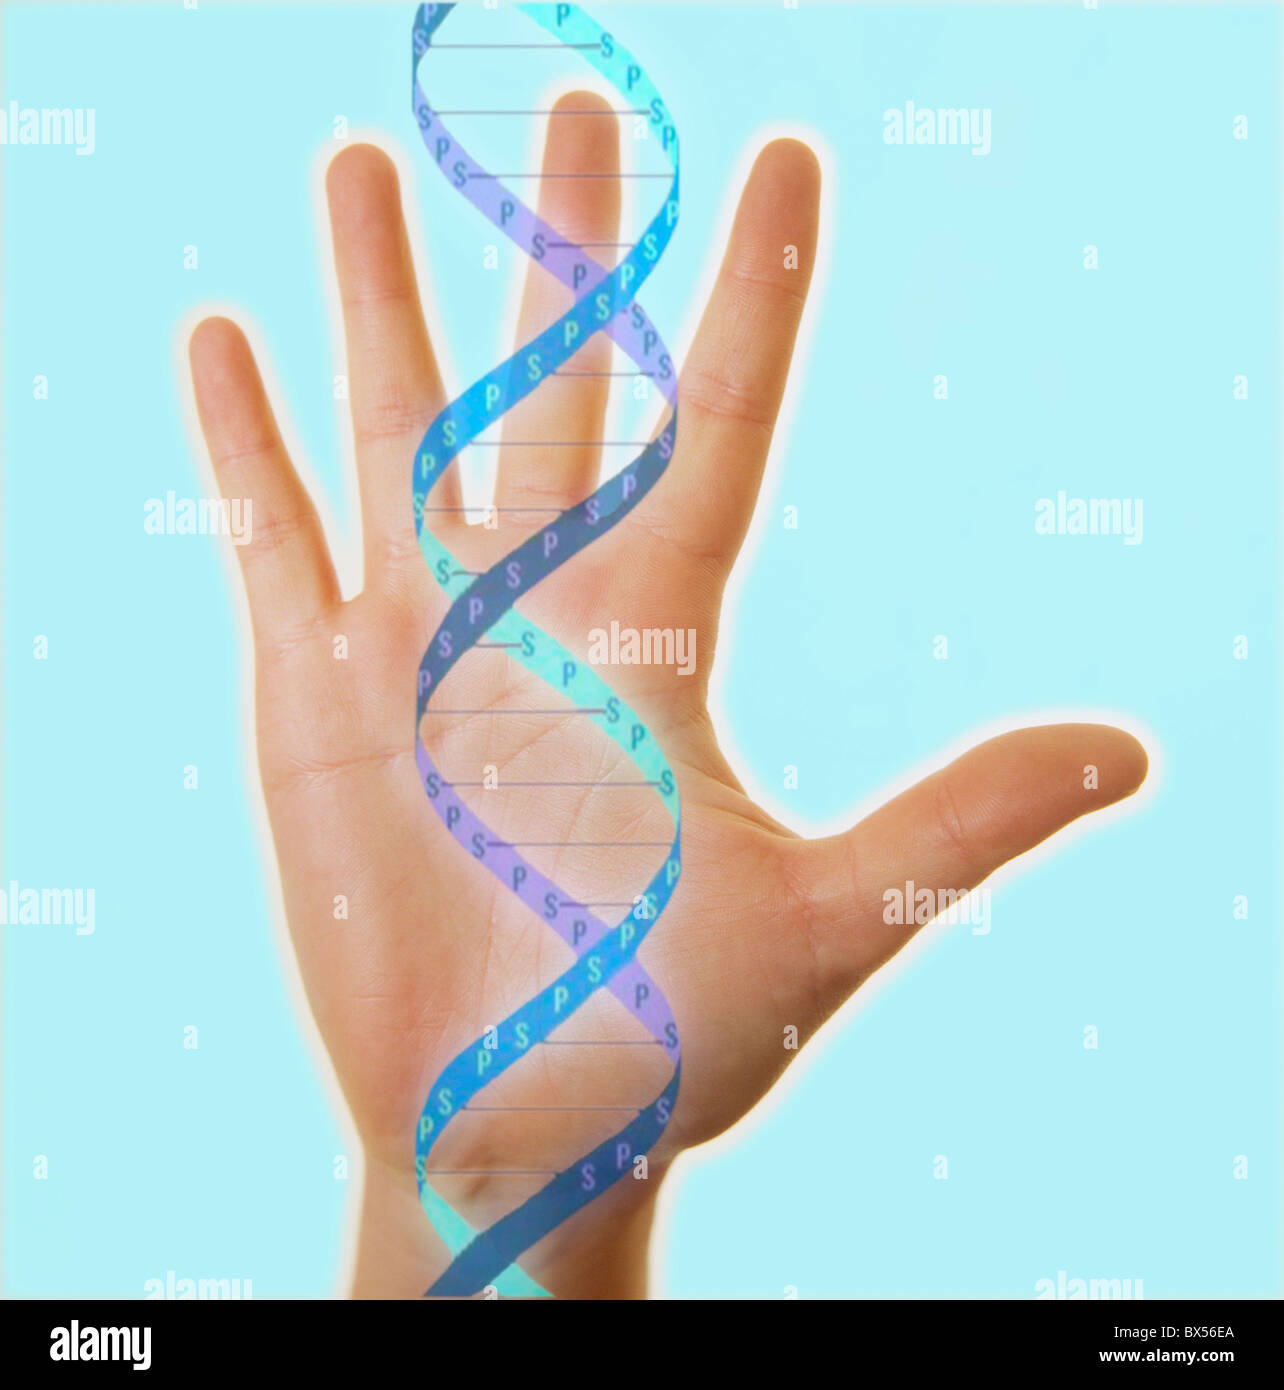 Hand and DNA molecule Stock Photo